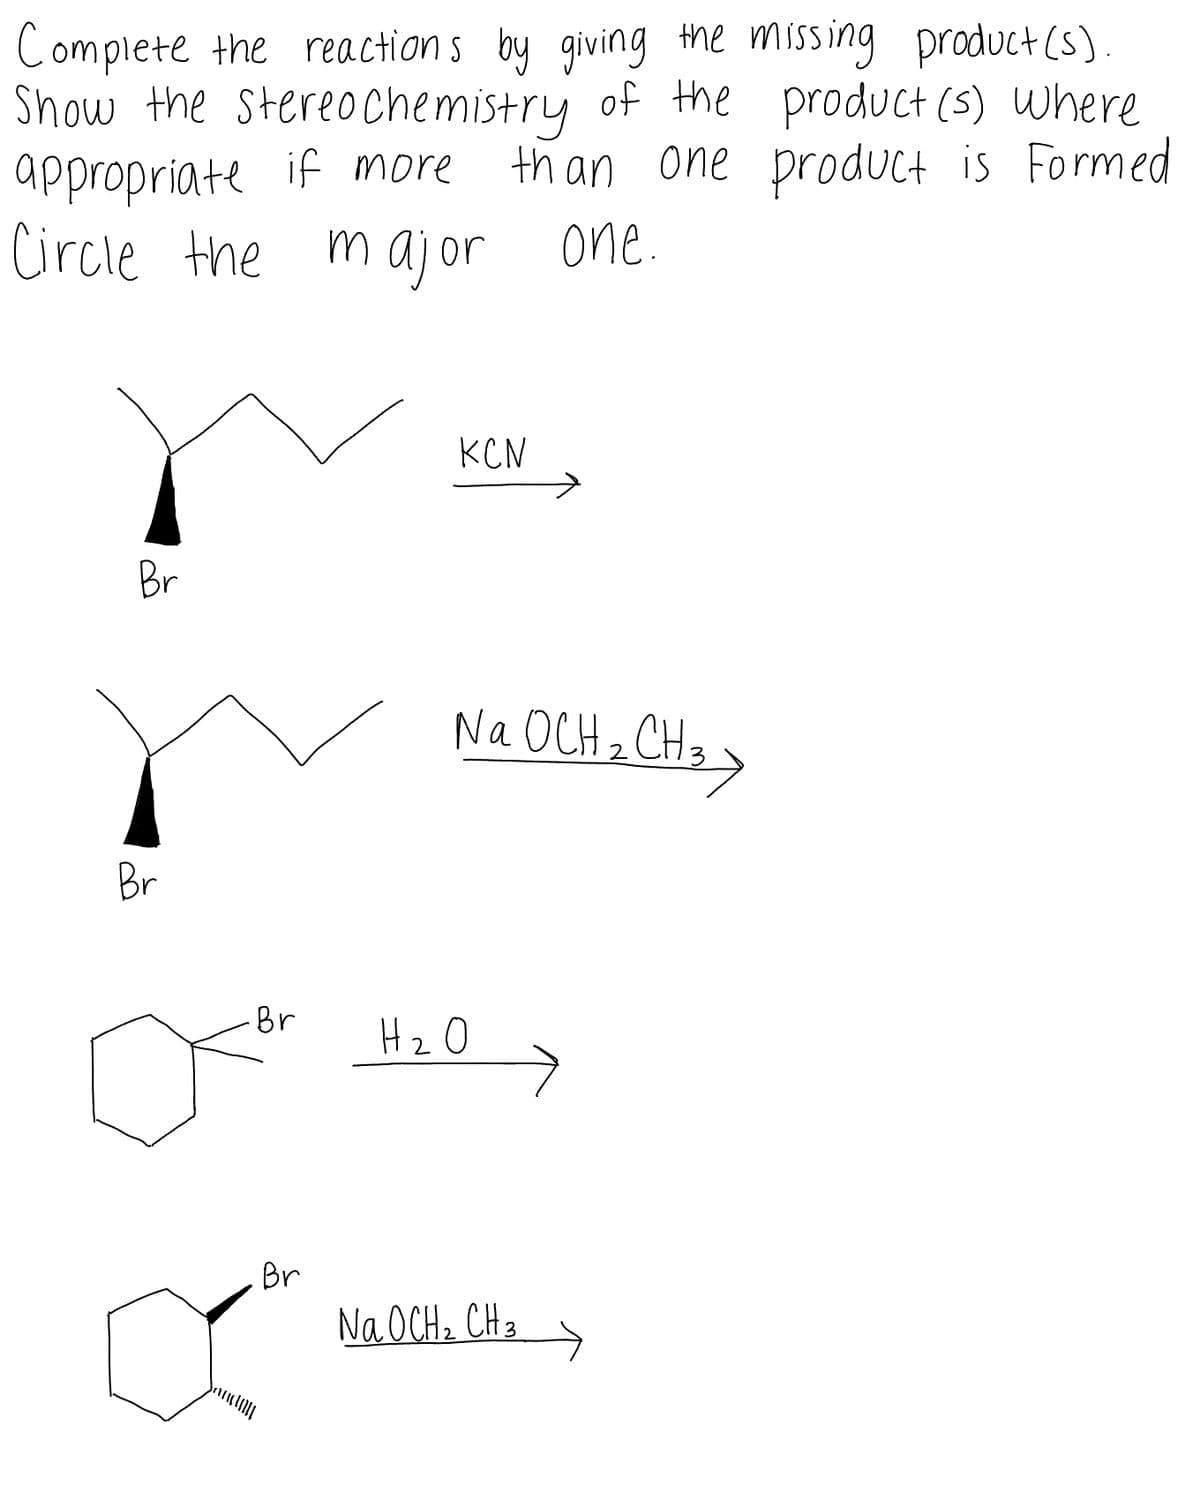 Complete the reaction s by giving the missing product (s).
Show the stereochemistry of the product (s) Where
appropriate if more
Circle the maj or one.
than one produUct is Formed
KCN
Br
Na OCH 2 CH3
Br
Br
H20
Br
Na OCH, CH3
